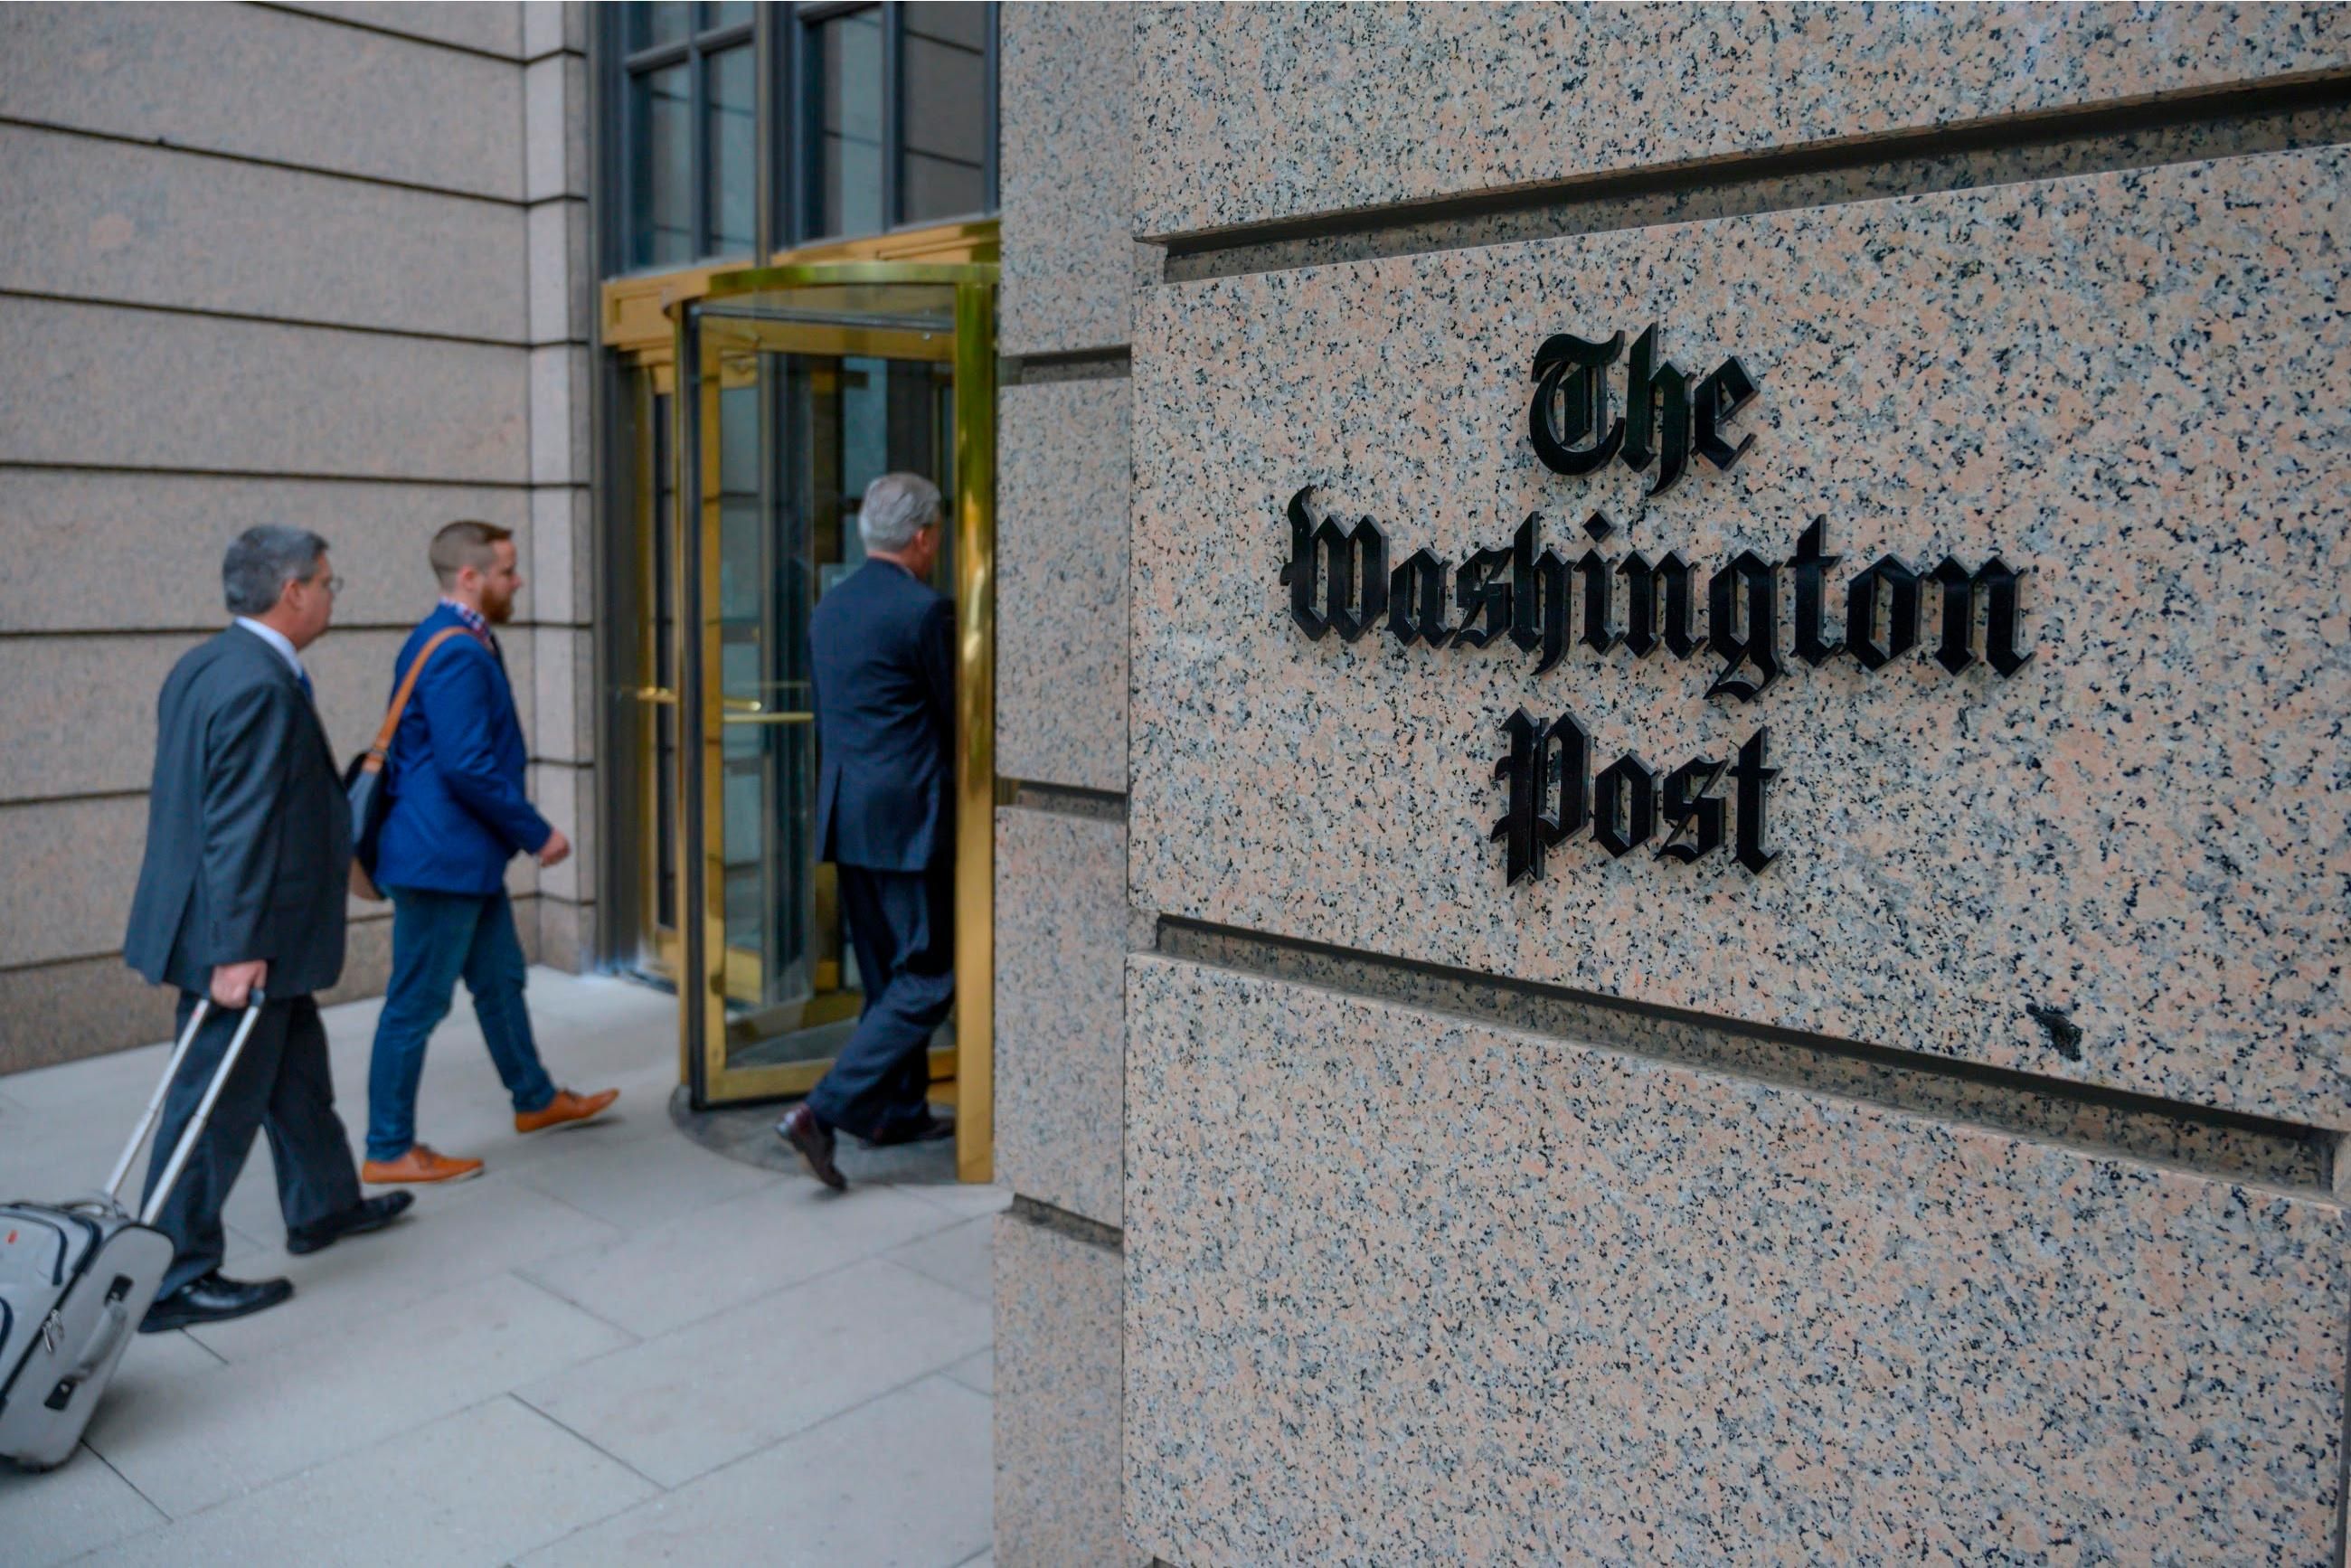 The building of the Washington Post newspaper headquarters is seen on K Street in Washington, D.C. on May 16, 2019. (Photo: Eric Baradat/AFP via Getty Images)